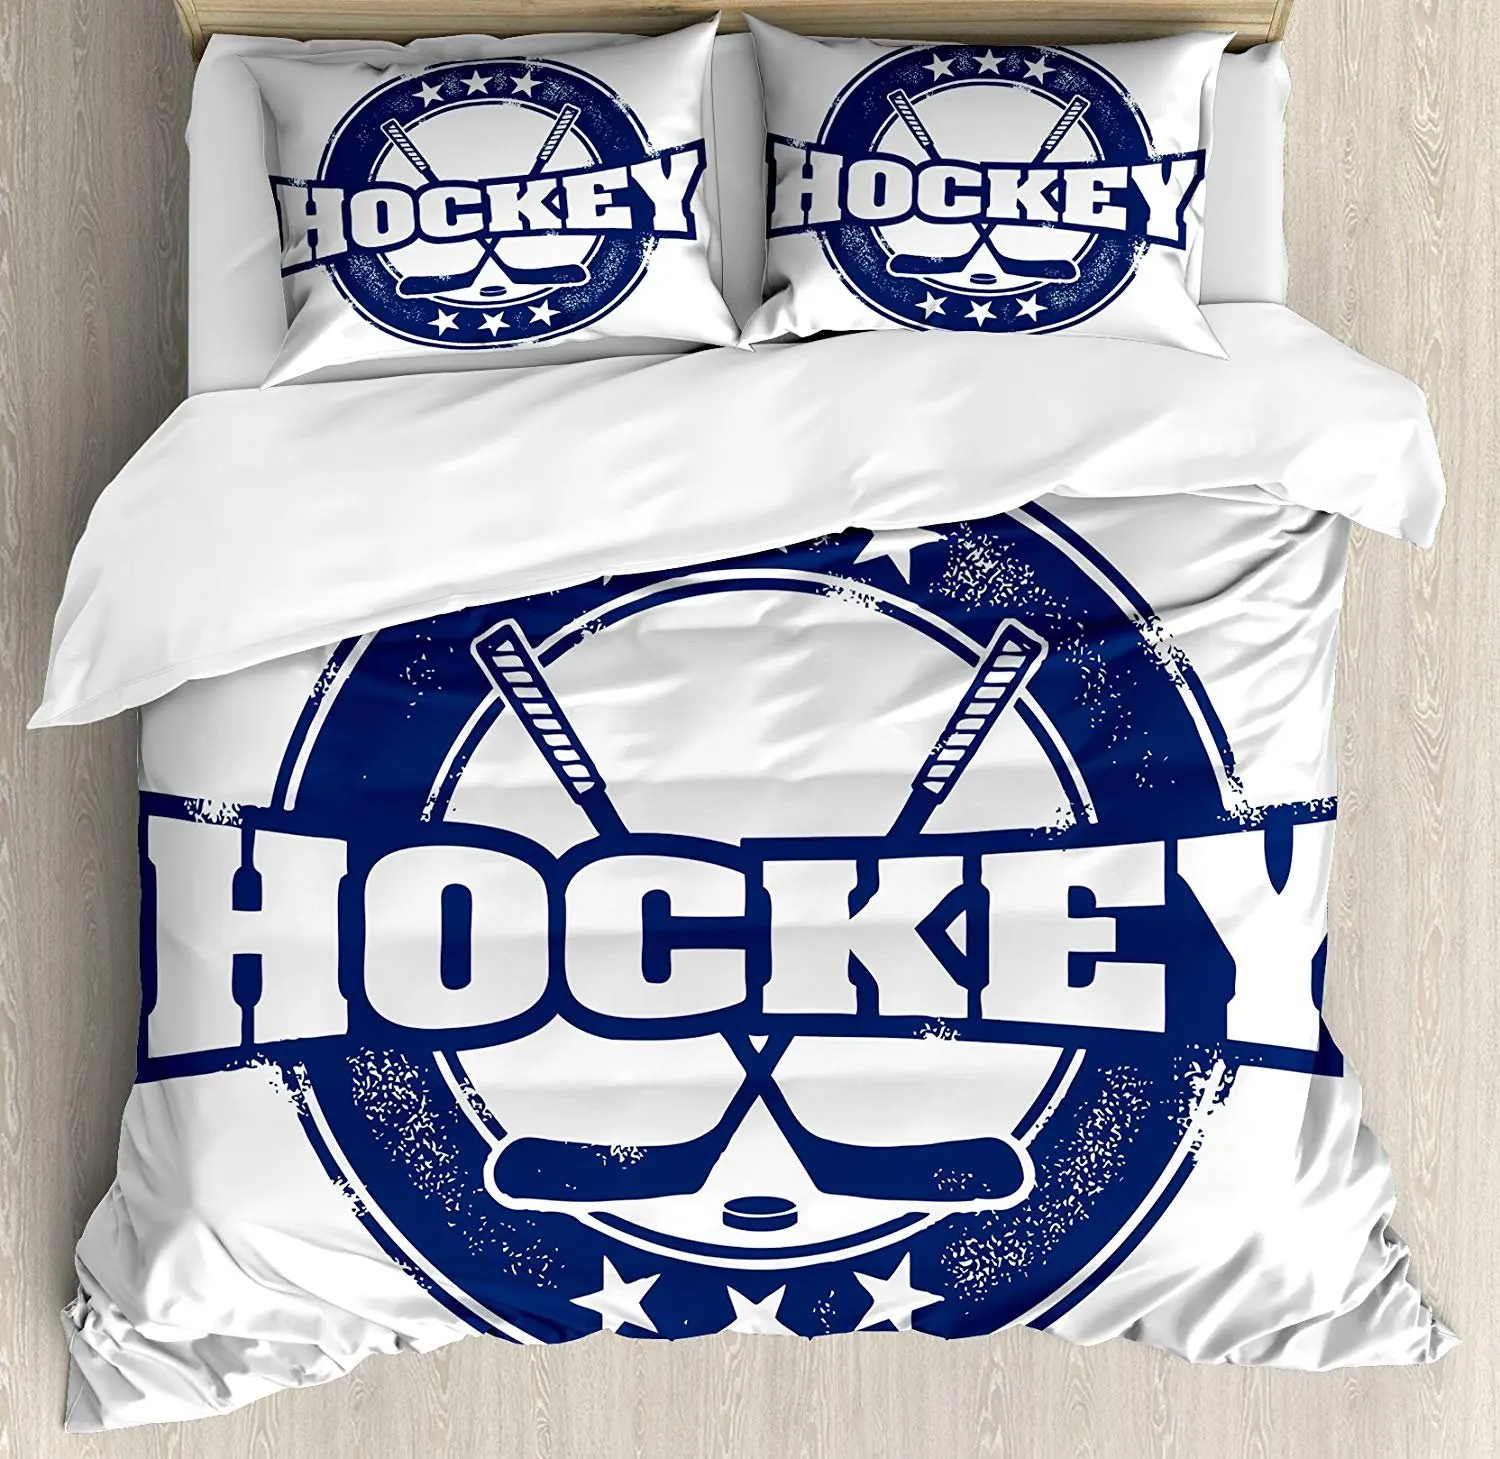 

Hockey Bedding Set Weathered Looking Vintage Stamp Composition Text Sticks and Stars in Circle Duvet Cover Pillowcase Bed Set